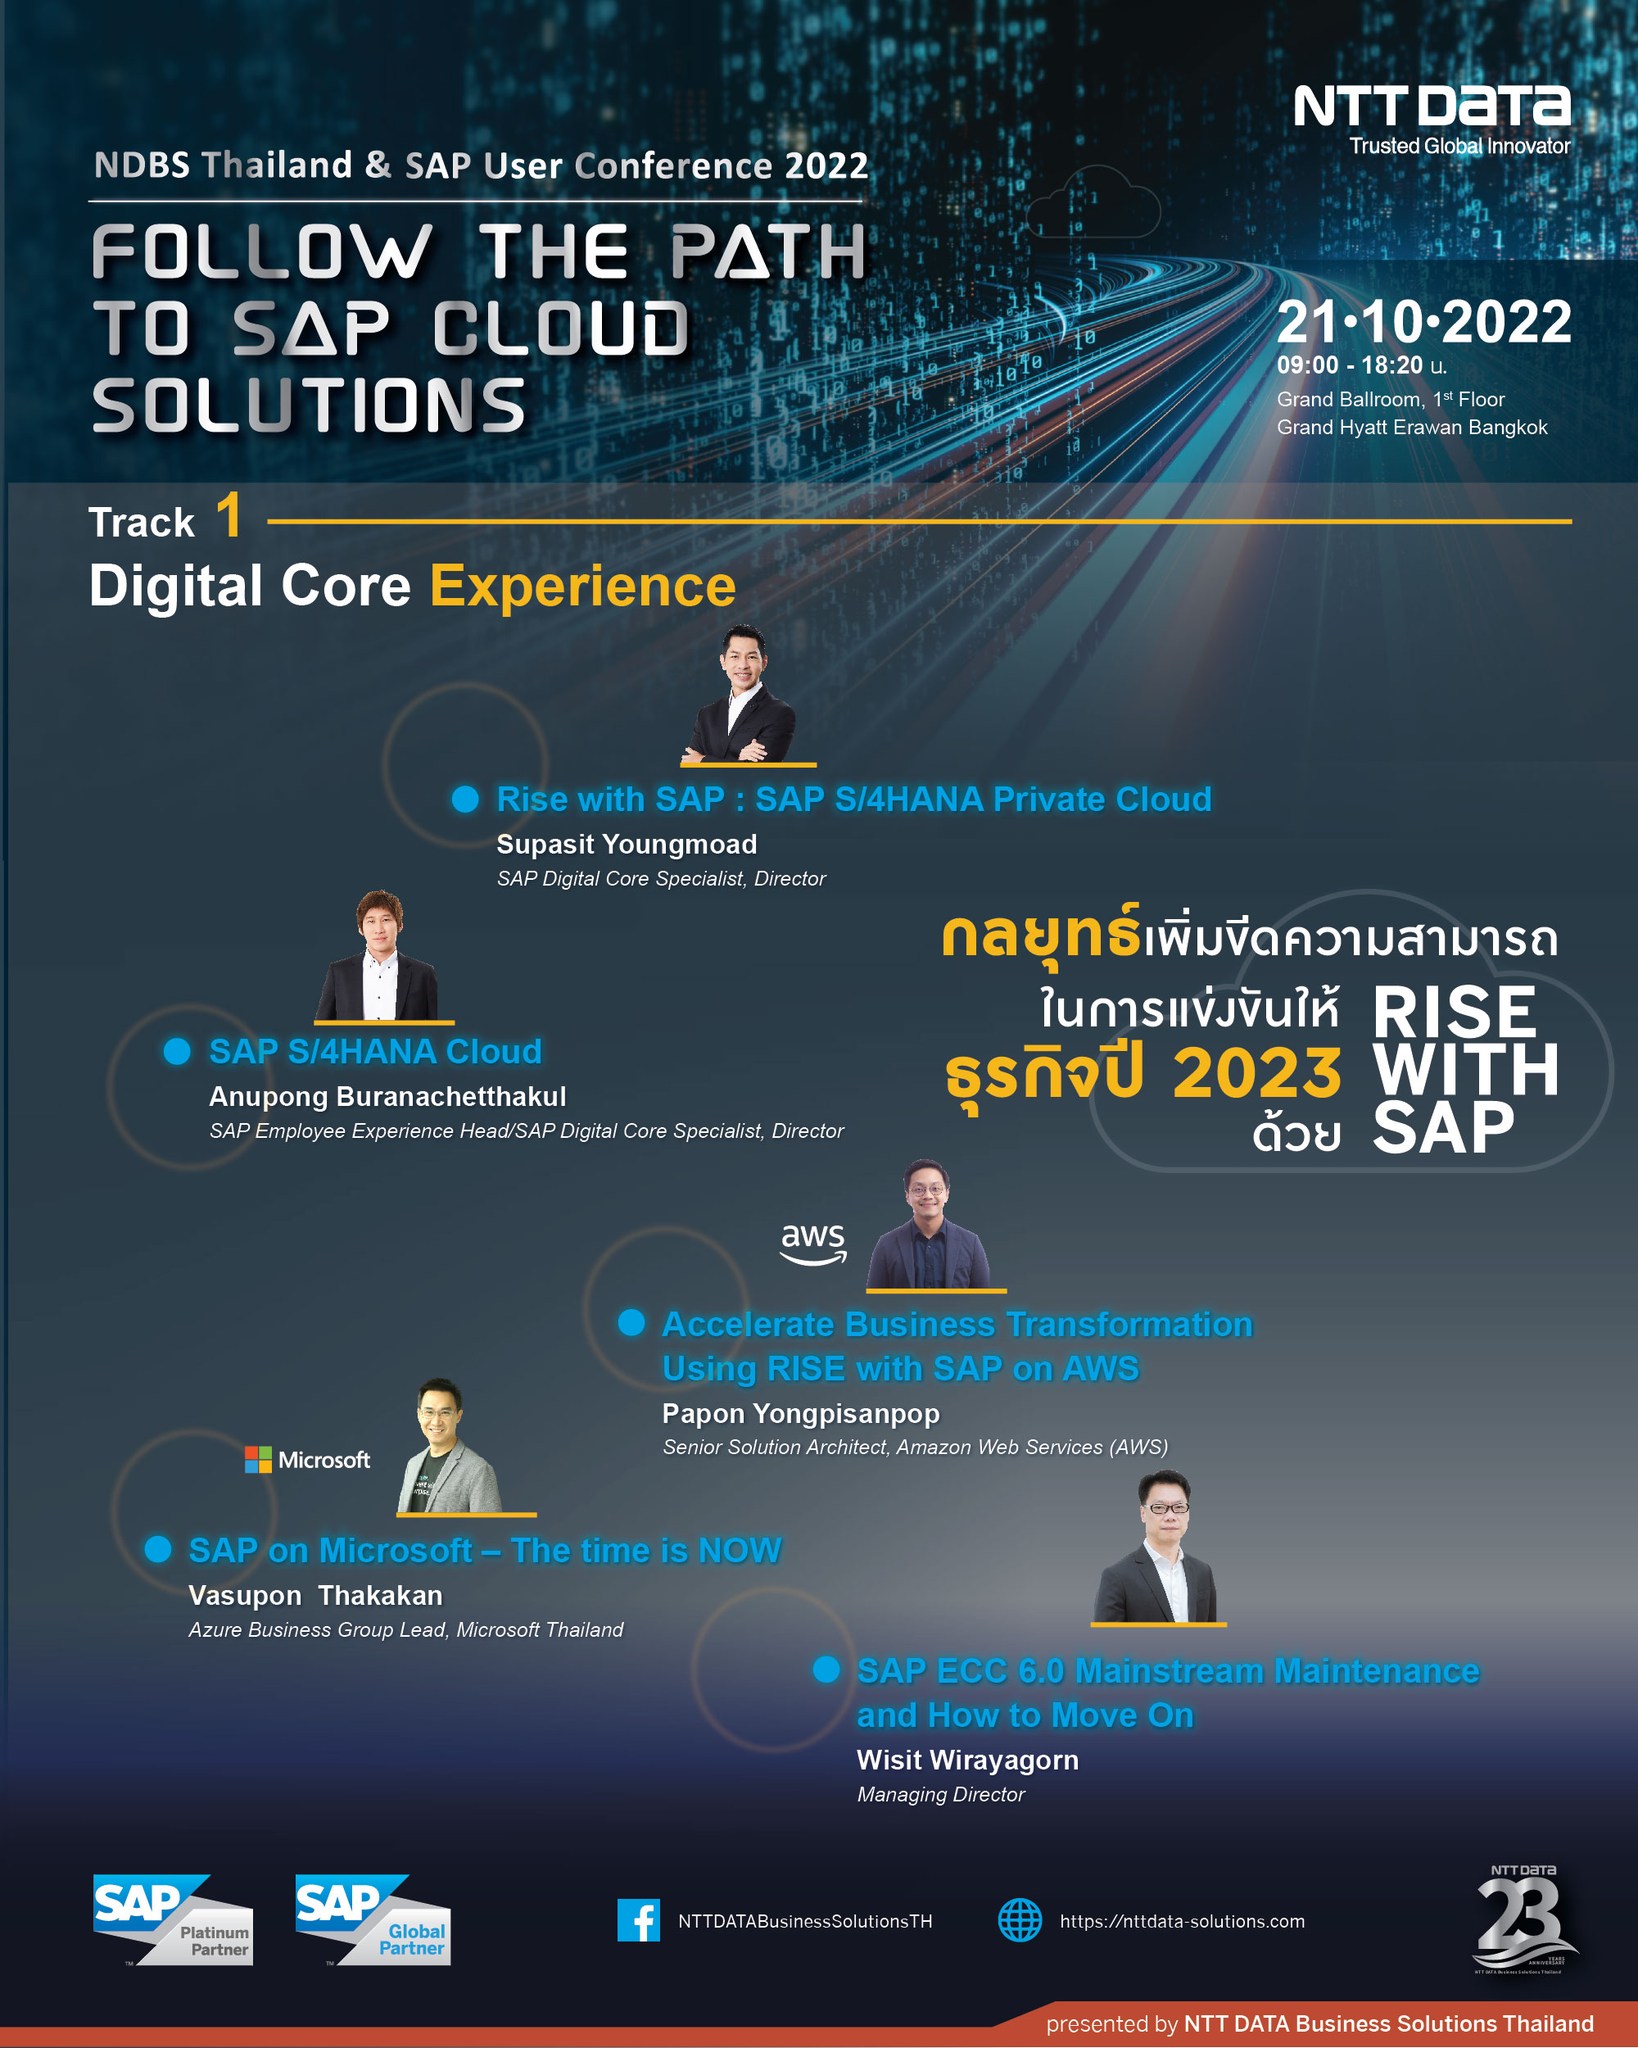 NDBS Thailand & SAP User Virtual Conference 2022 RYT9